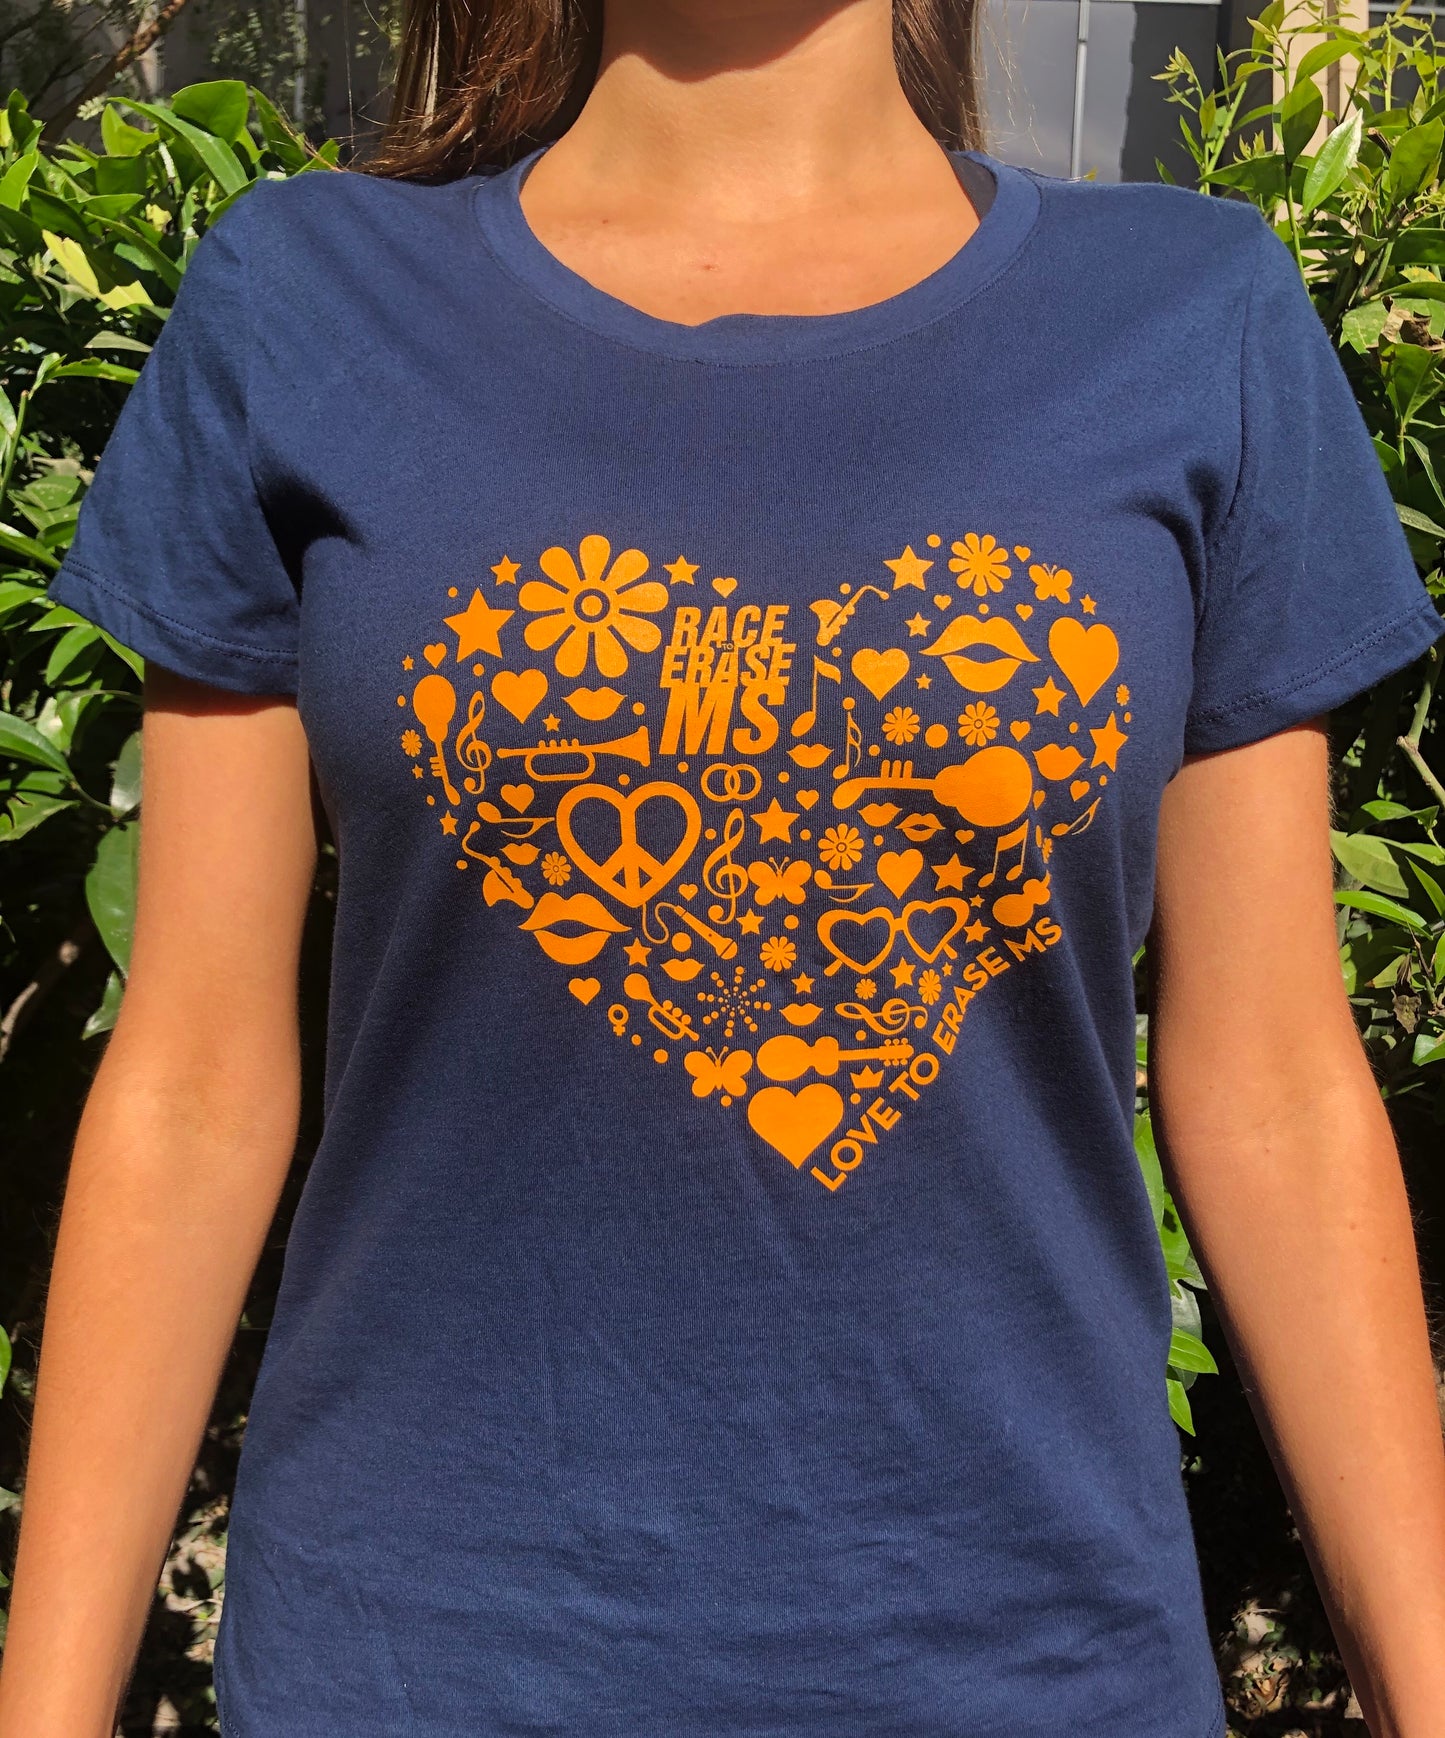 2019 Women's Race to Erase MS Campaign Tee